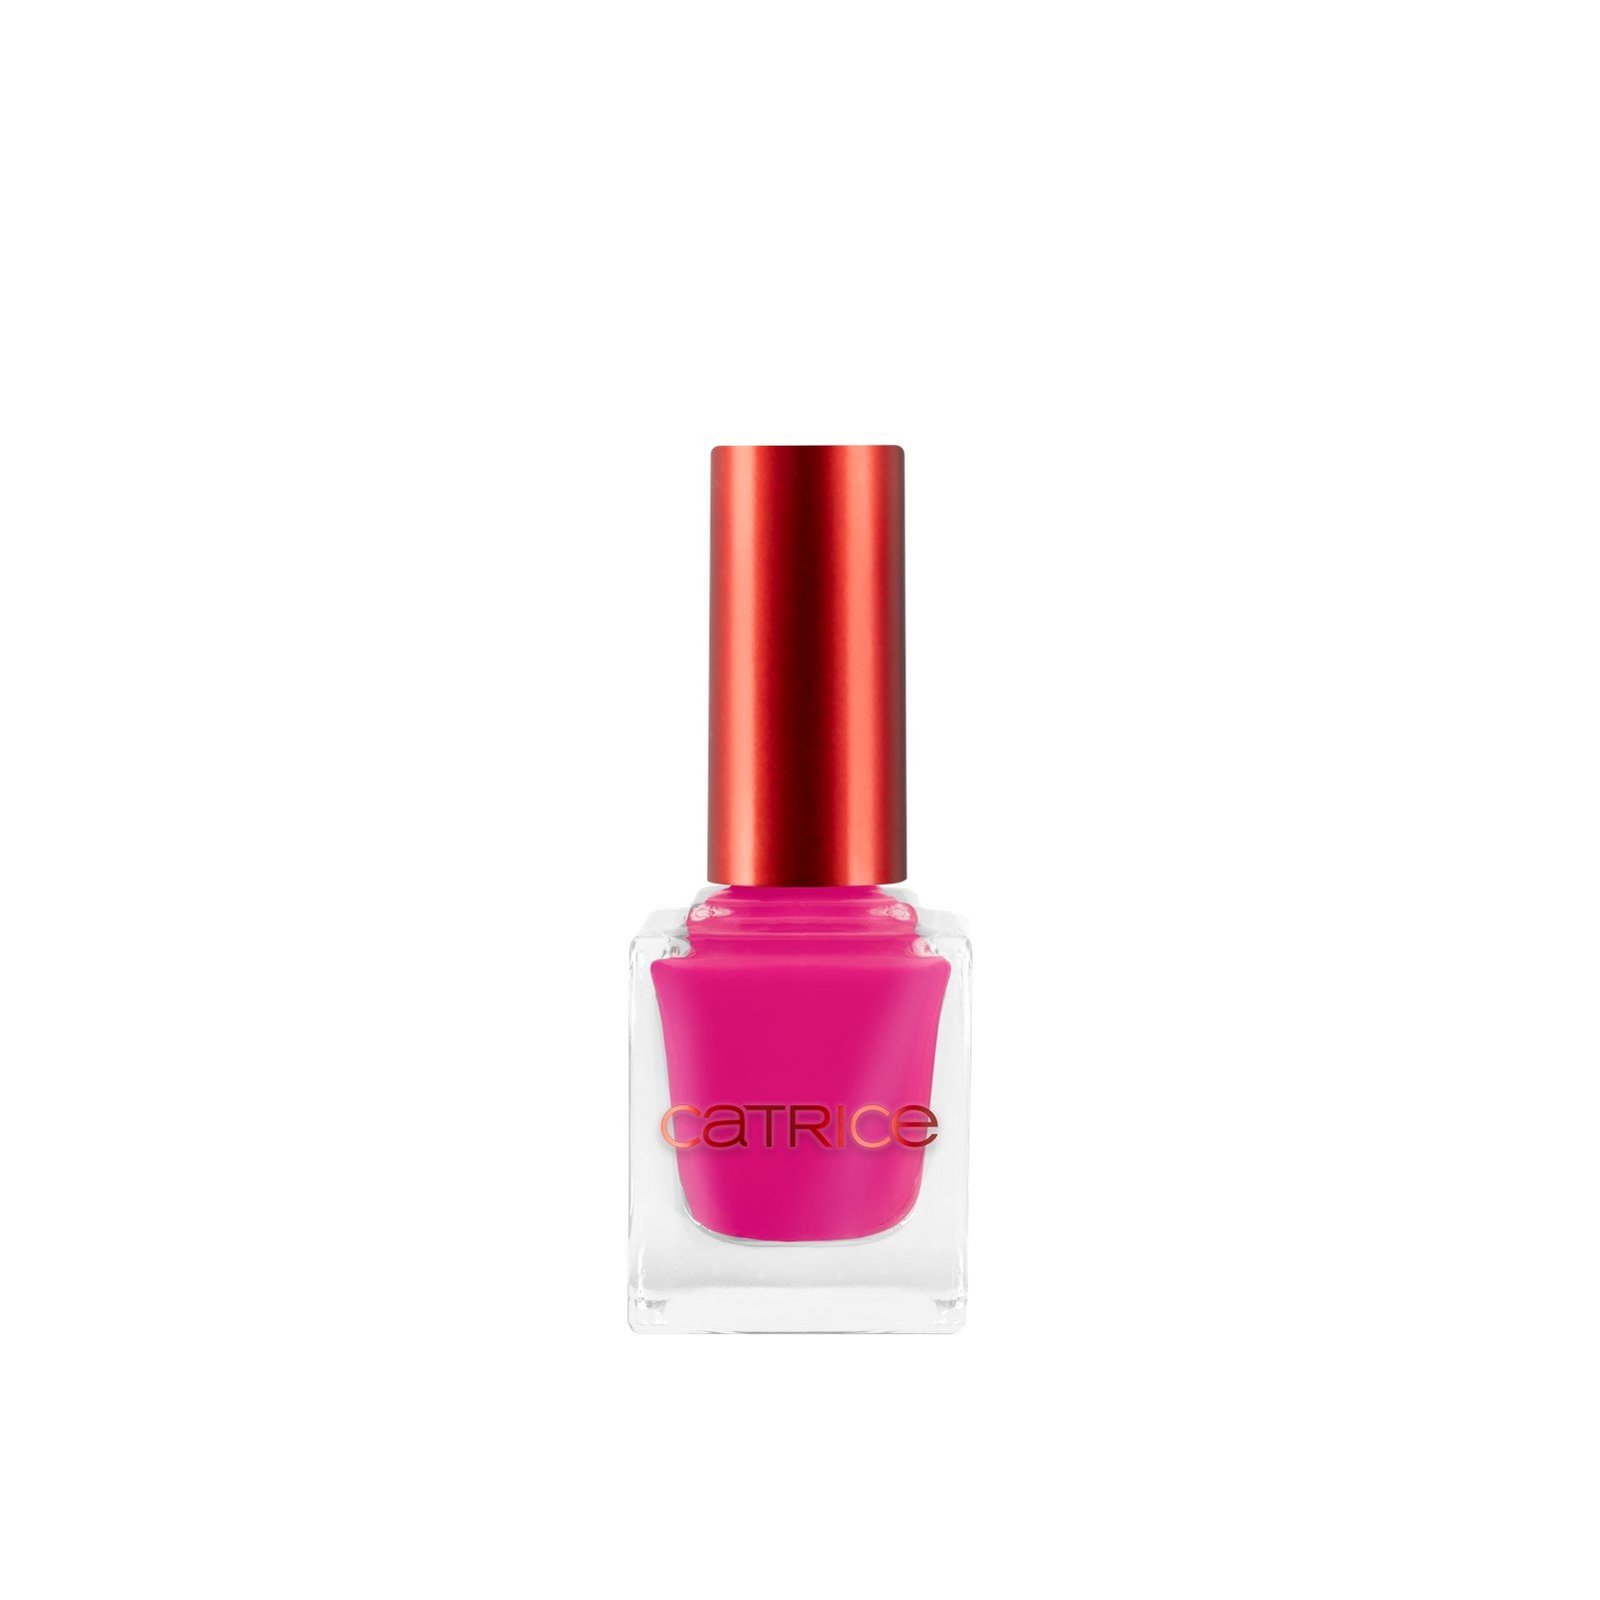 Catrice Heart Affair Nail Lacquer